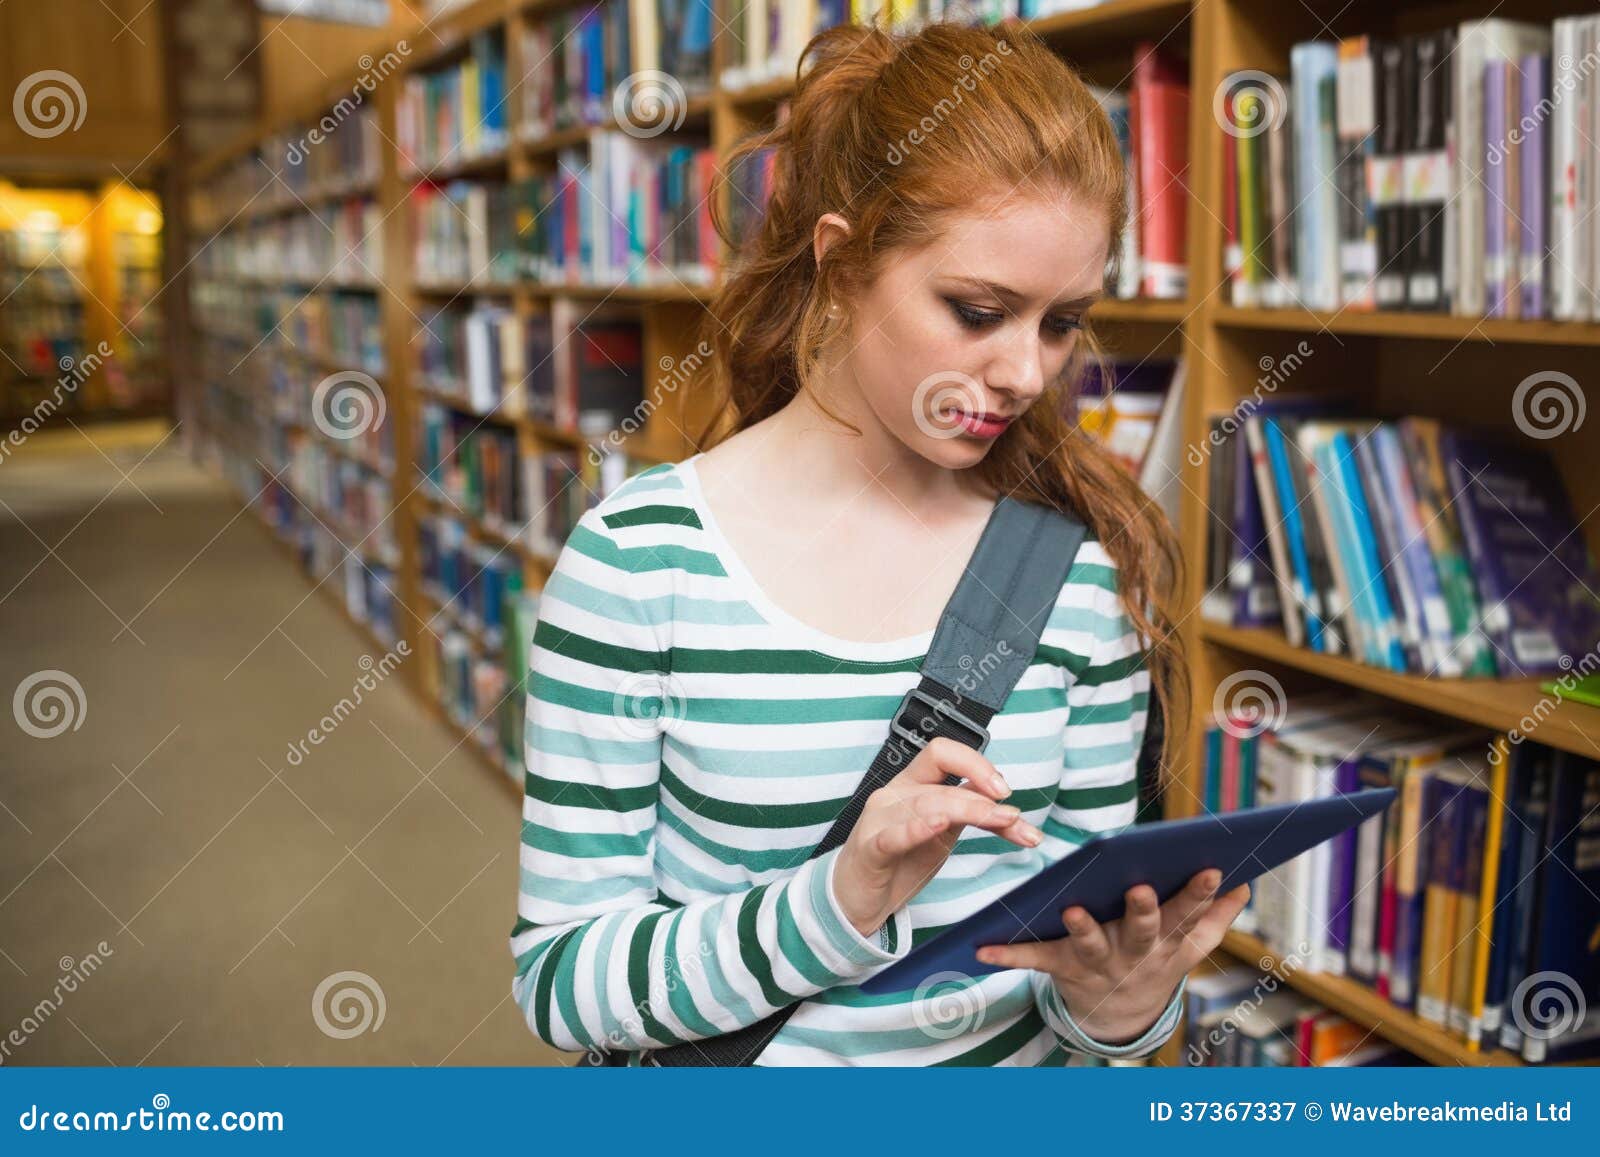 focused student using tablet standing in library